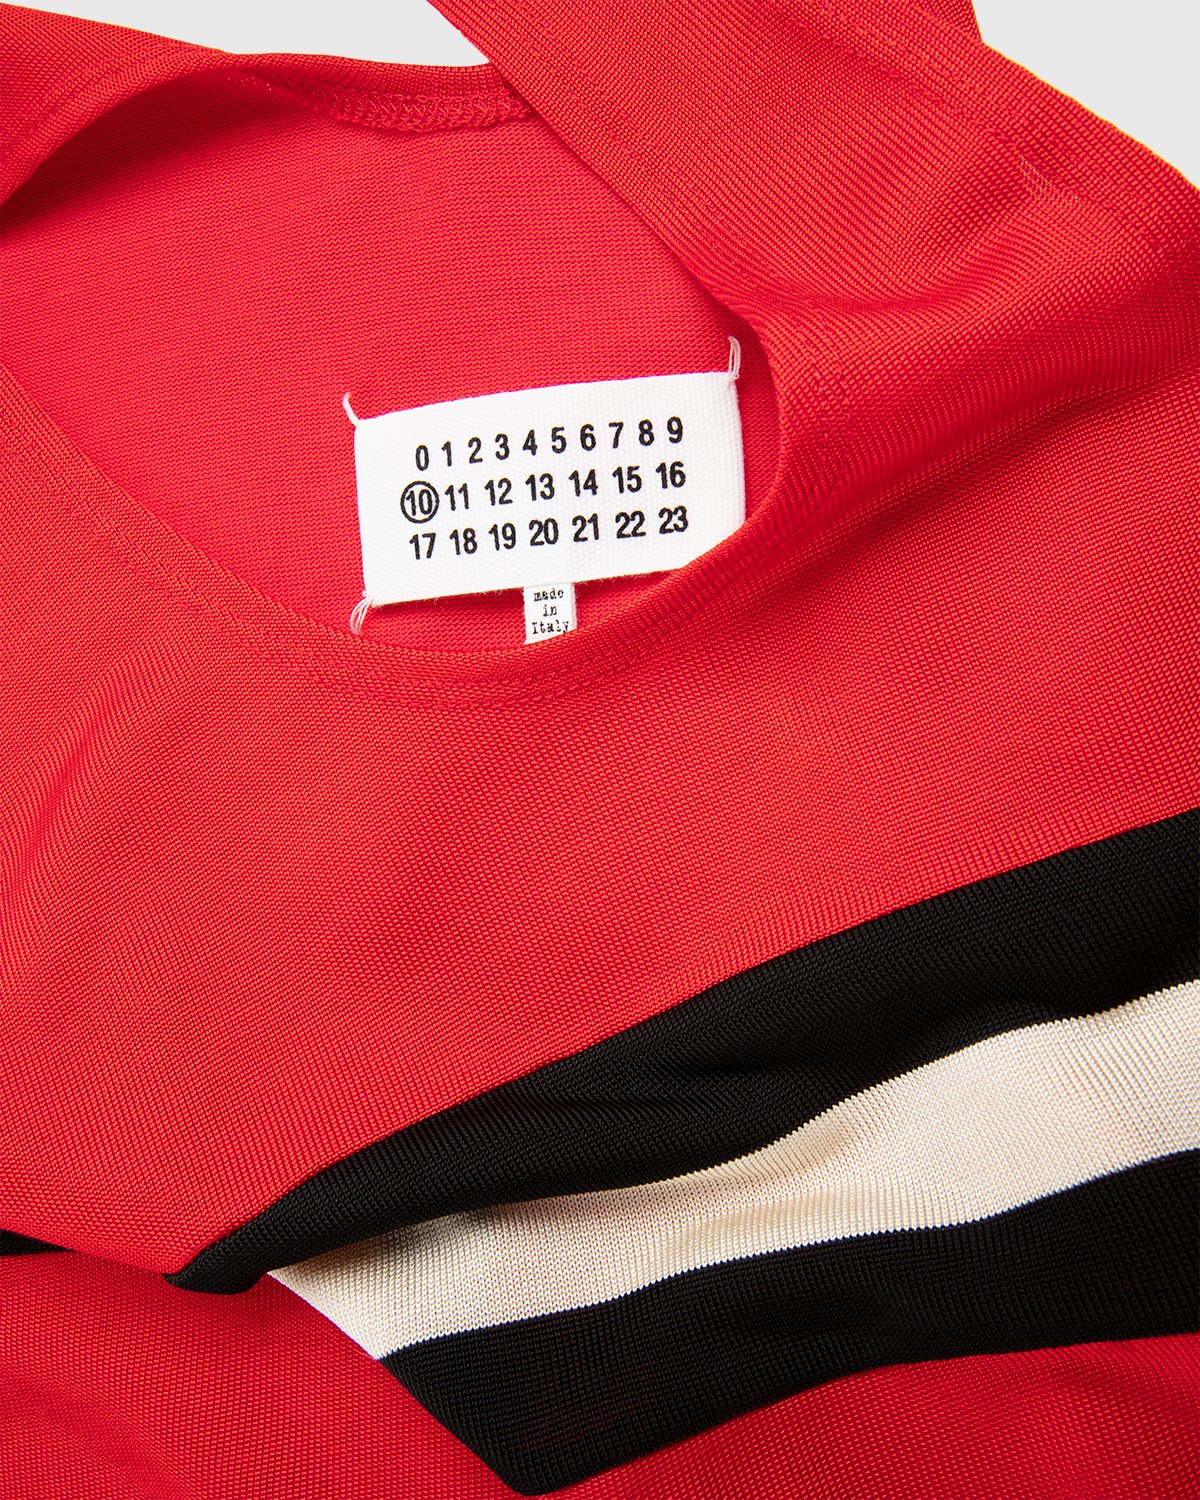 Maison Margiela - Tank Top Red - Clothing - Red - Image 3